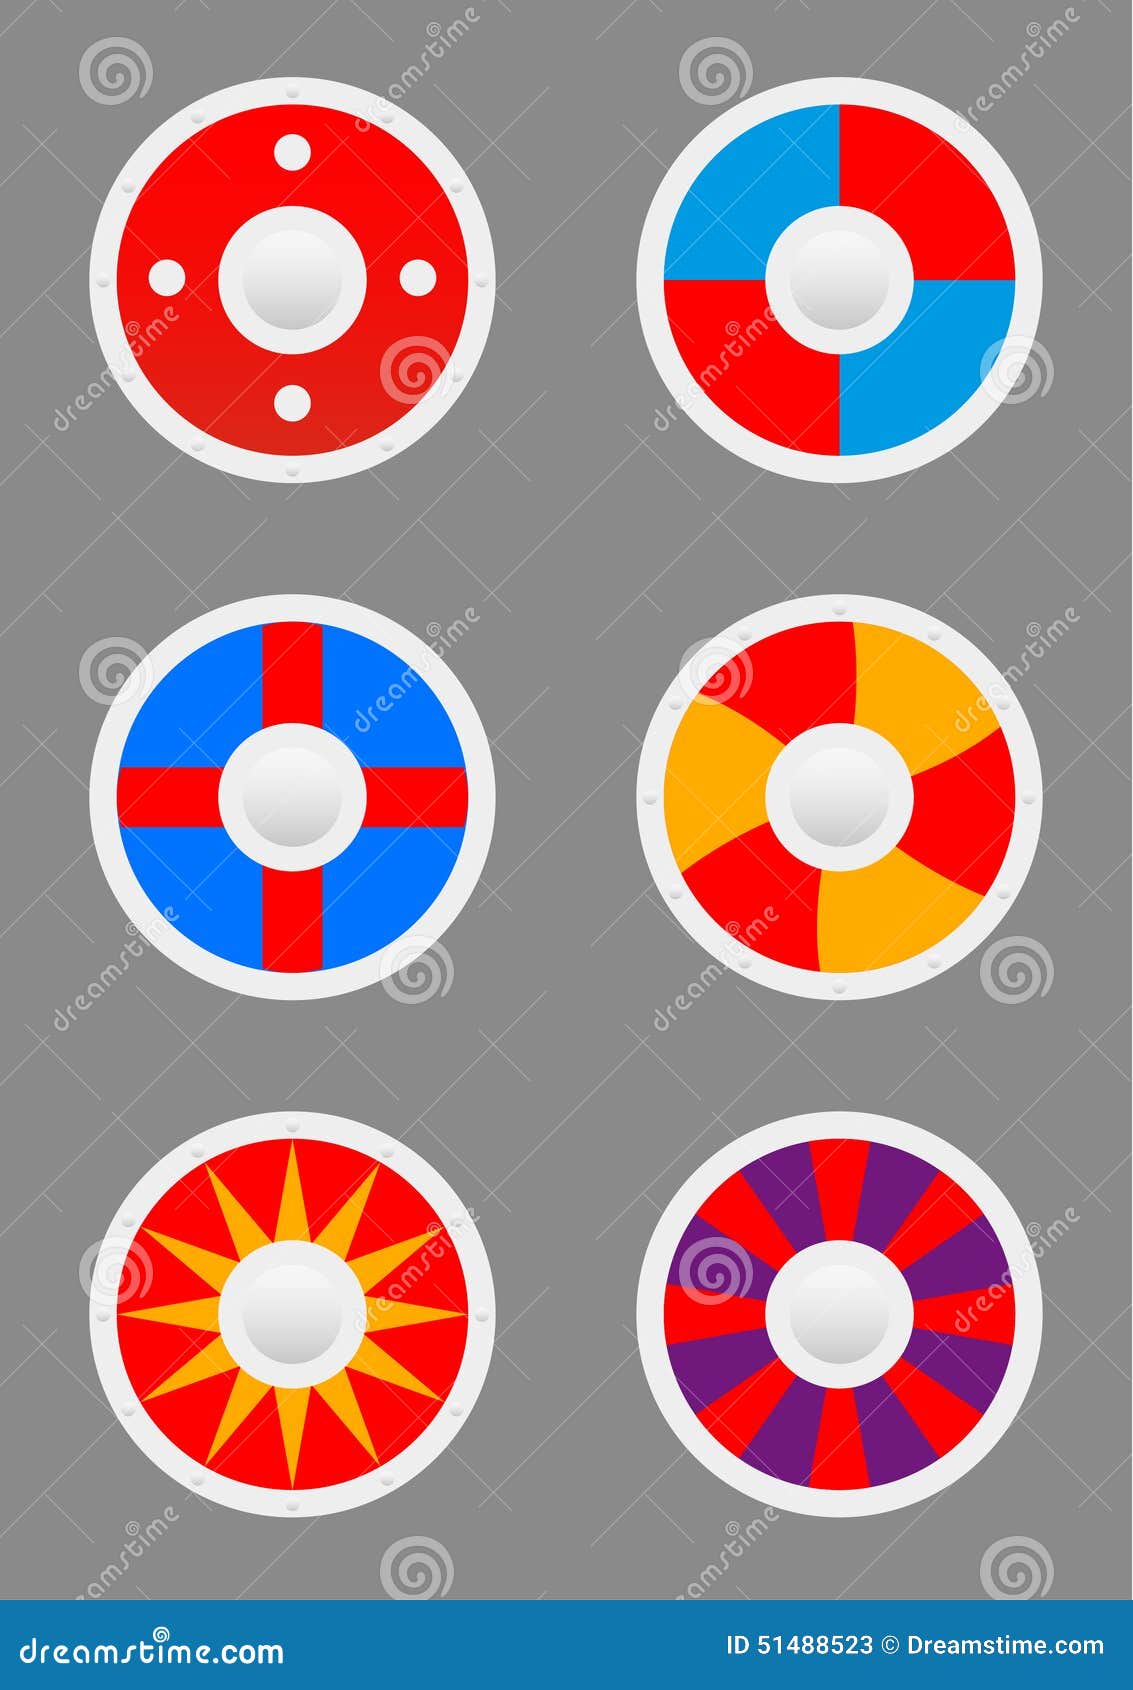 Round shields icons set stock vector. Illustration of knight - 51488523